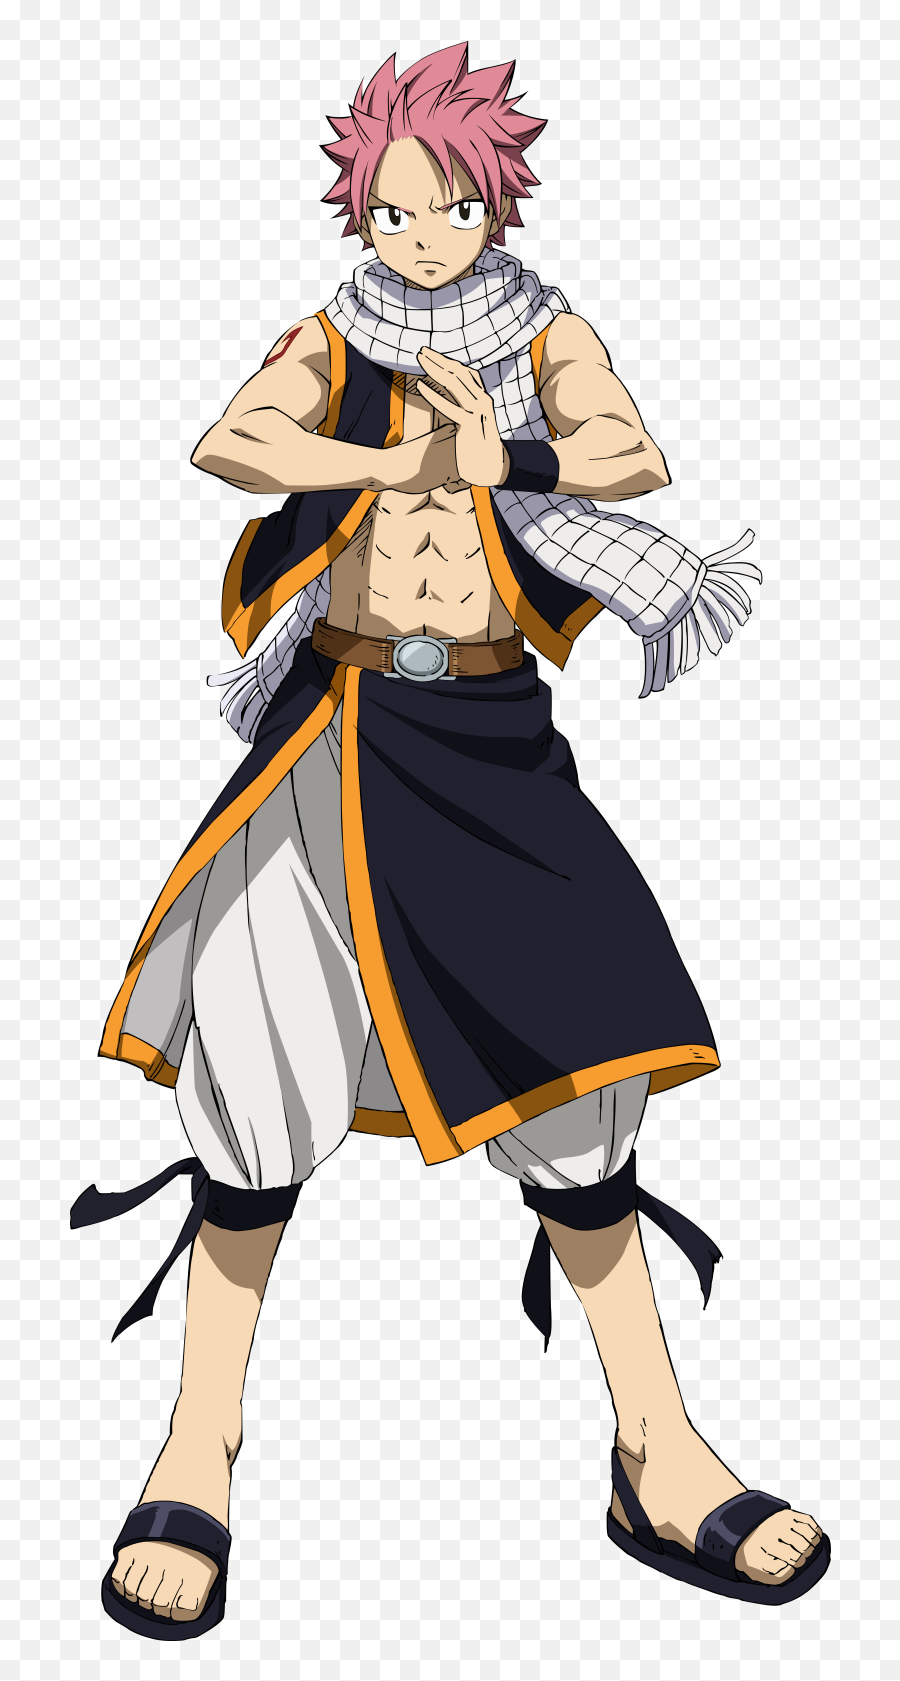 Fairy Tail Natsu Dragneel Cosplay - Fairy Tail Anime Costume Png,Natsu Dragneel Png